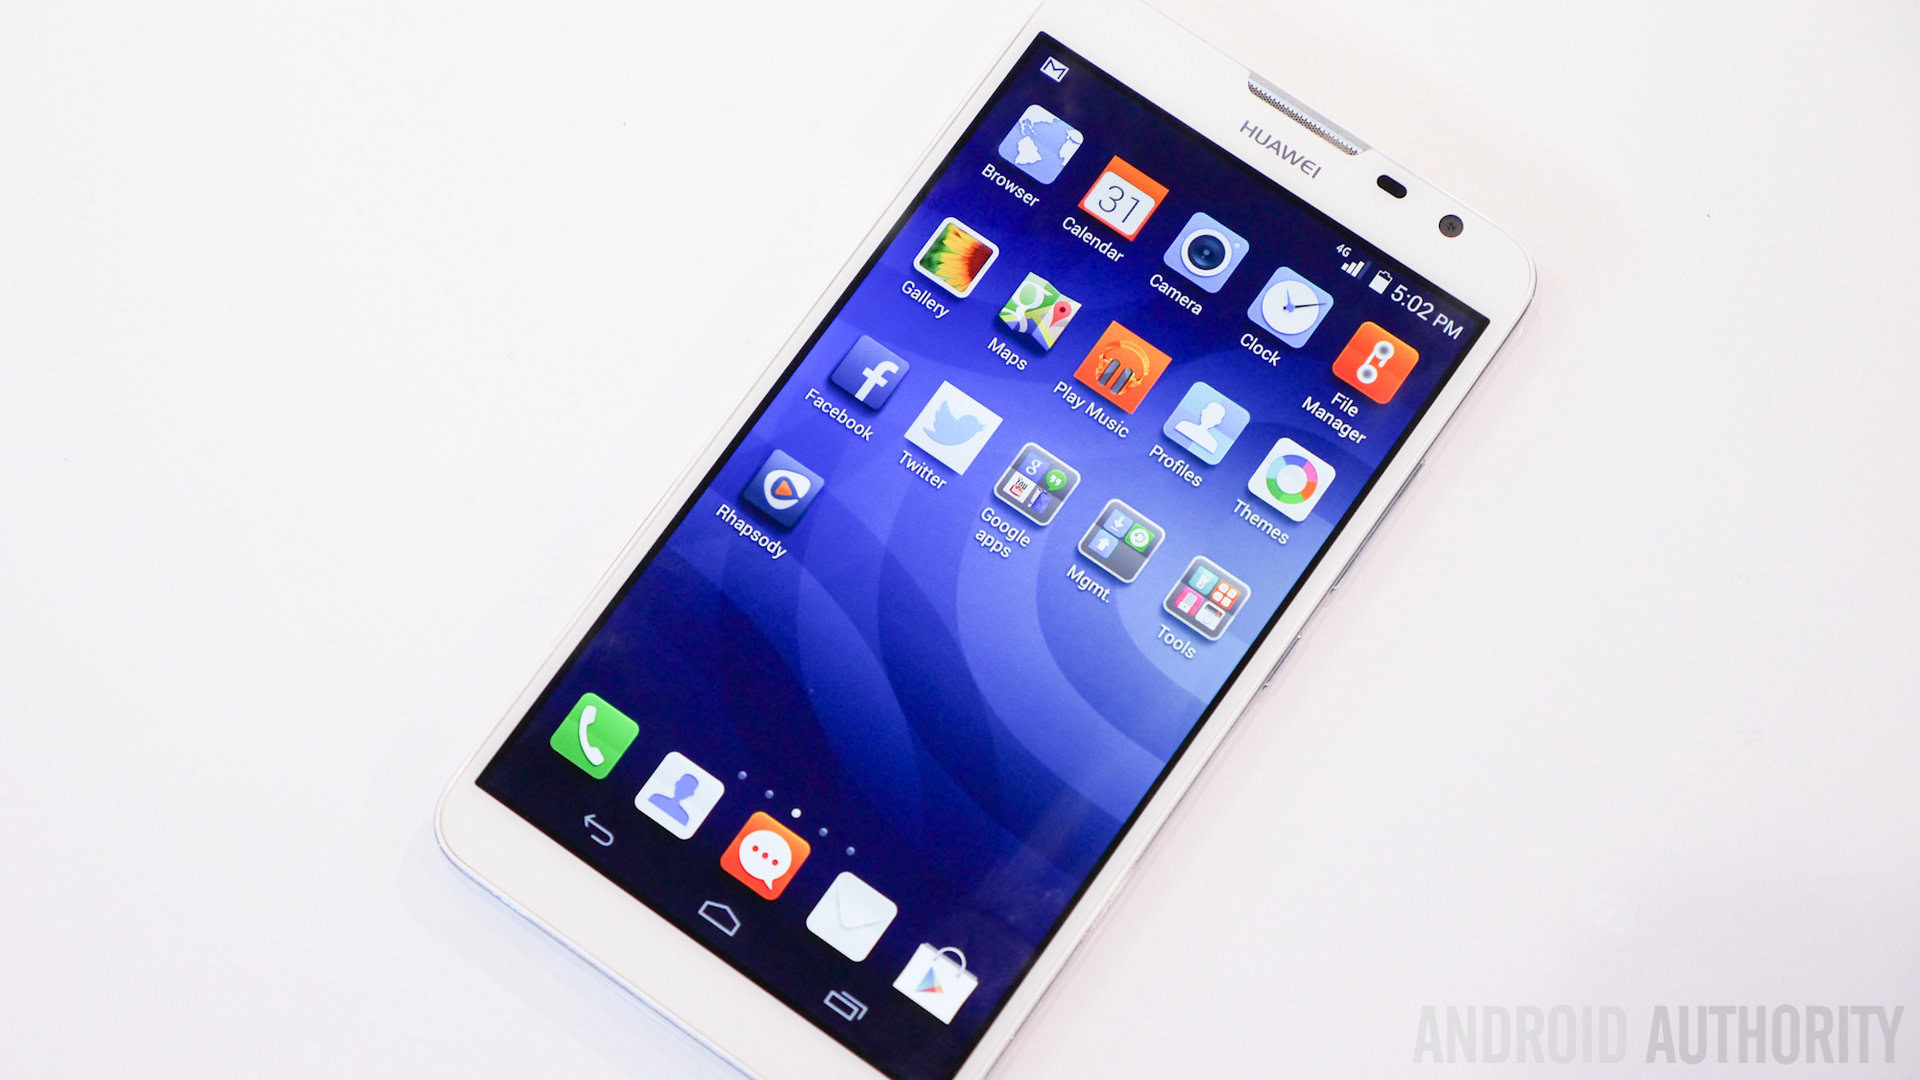 Huawei Ascend Mate 2 Phablet Hands on AA -8